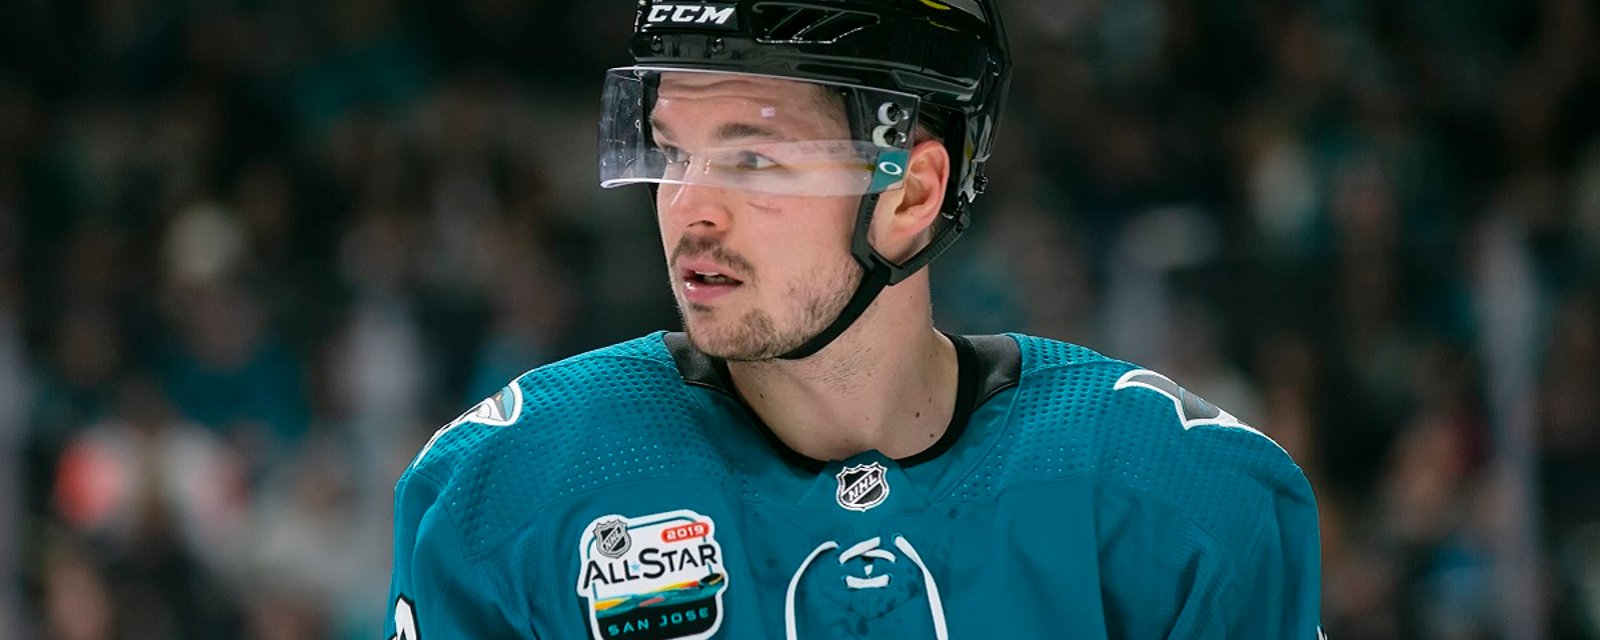 Tomas Hertl guarantees a Game 7 and then sets an NHL record to make it happen.